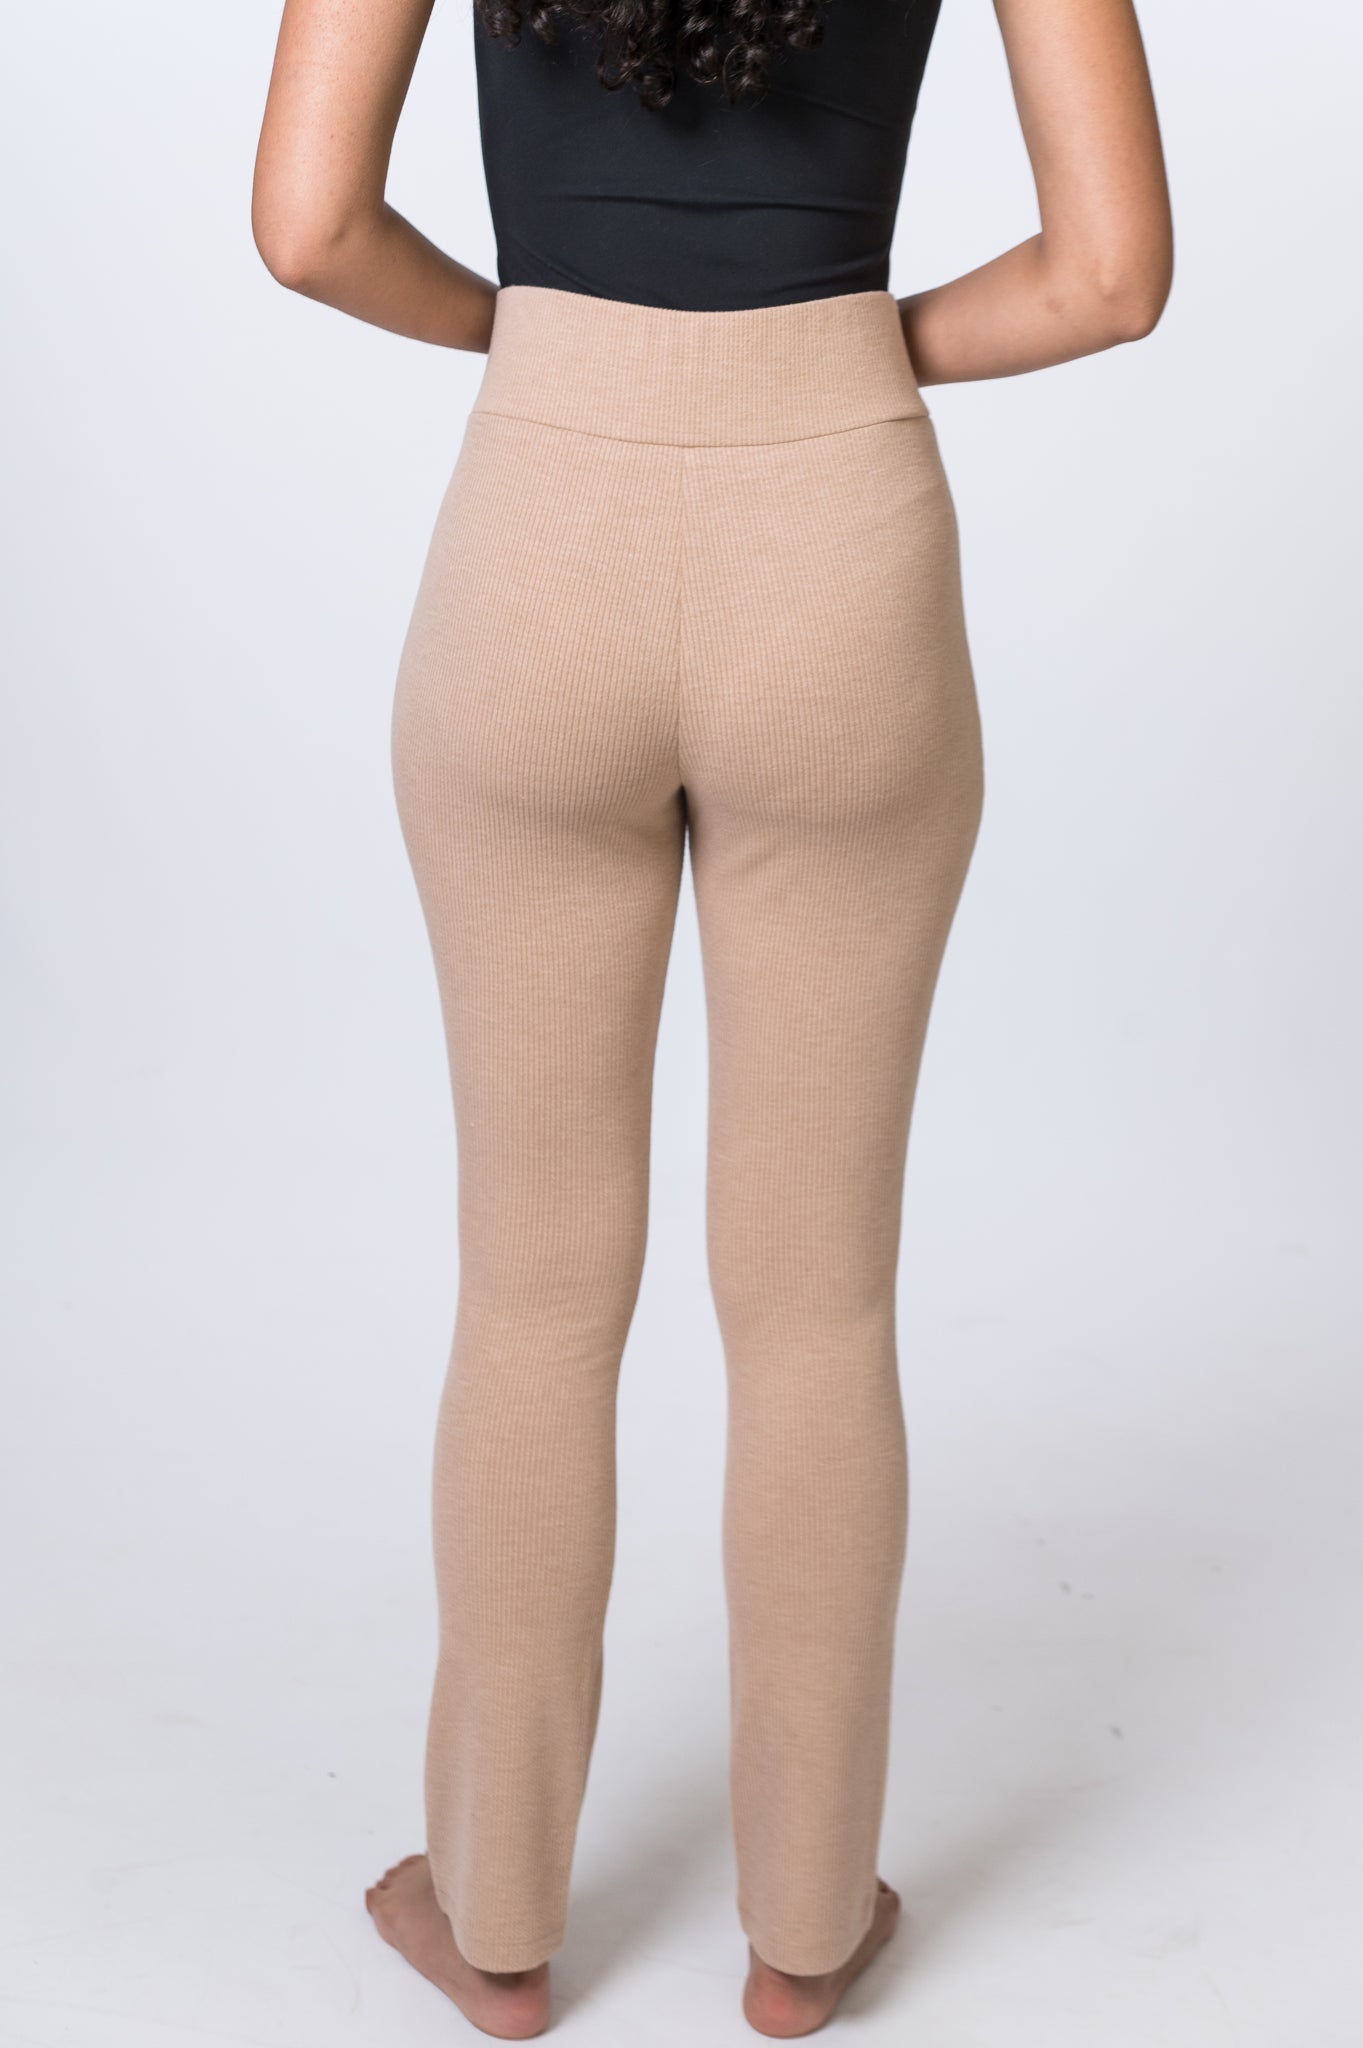 Woman wearing tan, ribbed lounge pants with a black bodysuit. Back of clothing is being shown